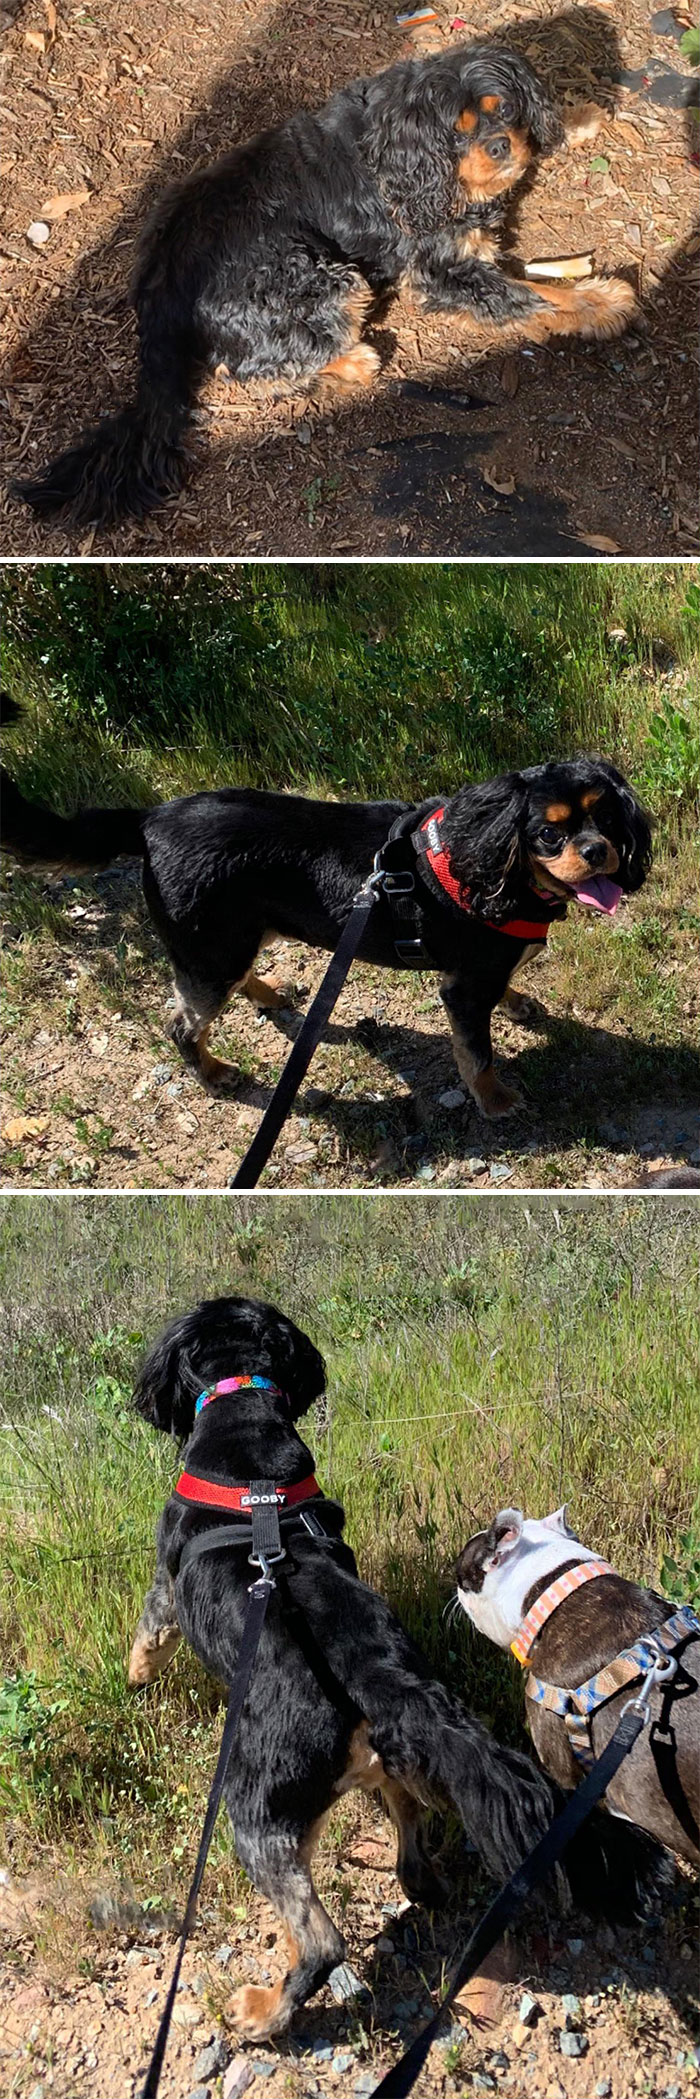 My Dog One Year Apart. I Thought I’d Share His Journey - He’s Not Quite As Active As The Other Dog But He’s Doing So Much Better